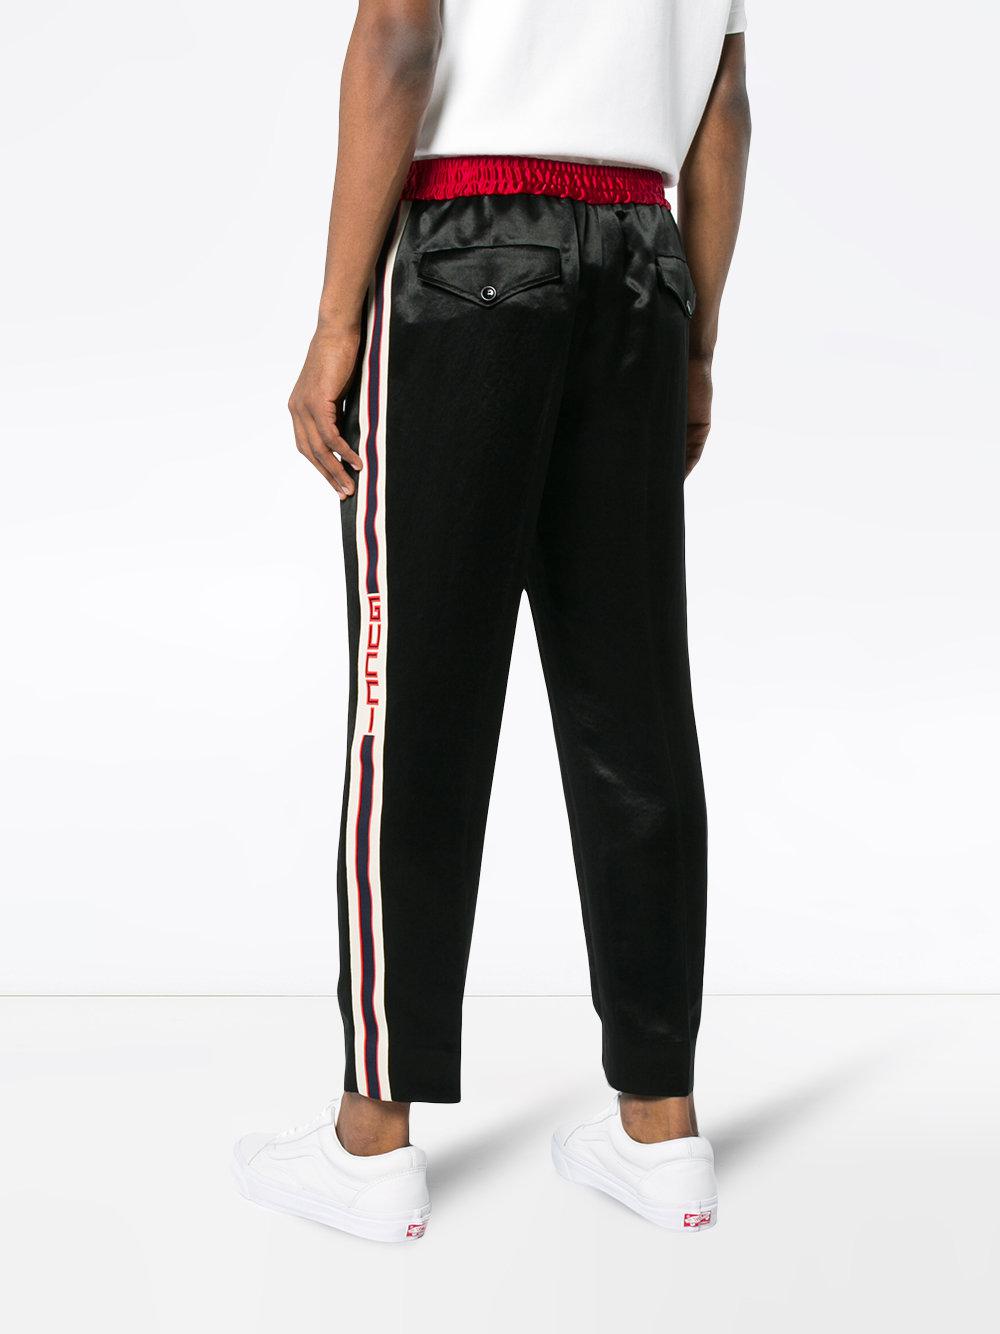 Gucci Cotton Side Stripe Track Pants in Black for Men - Lyst